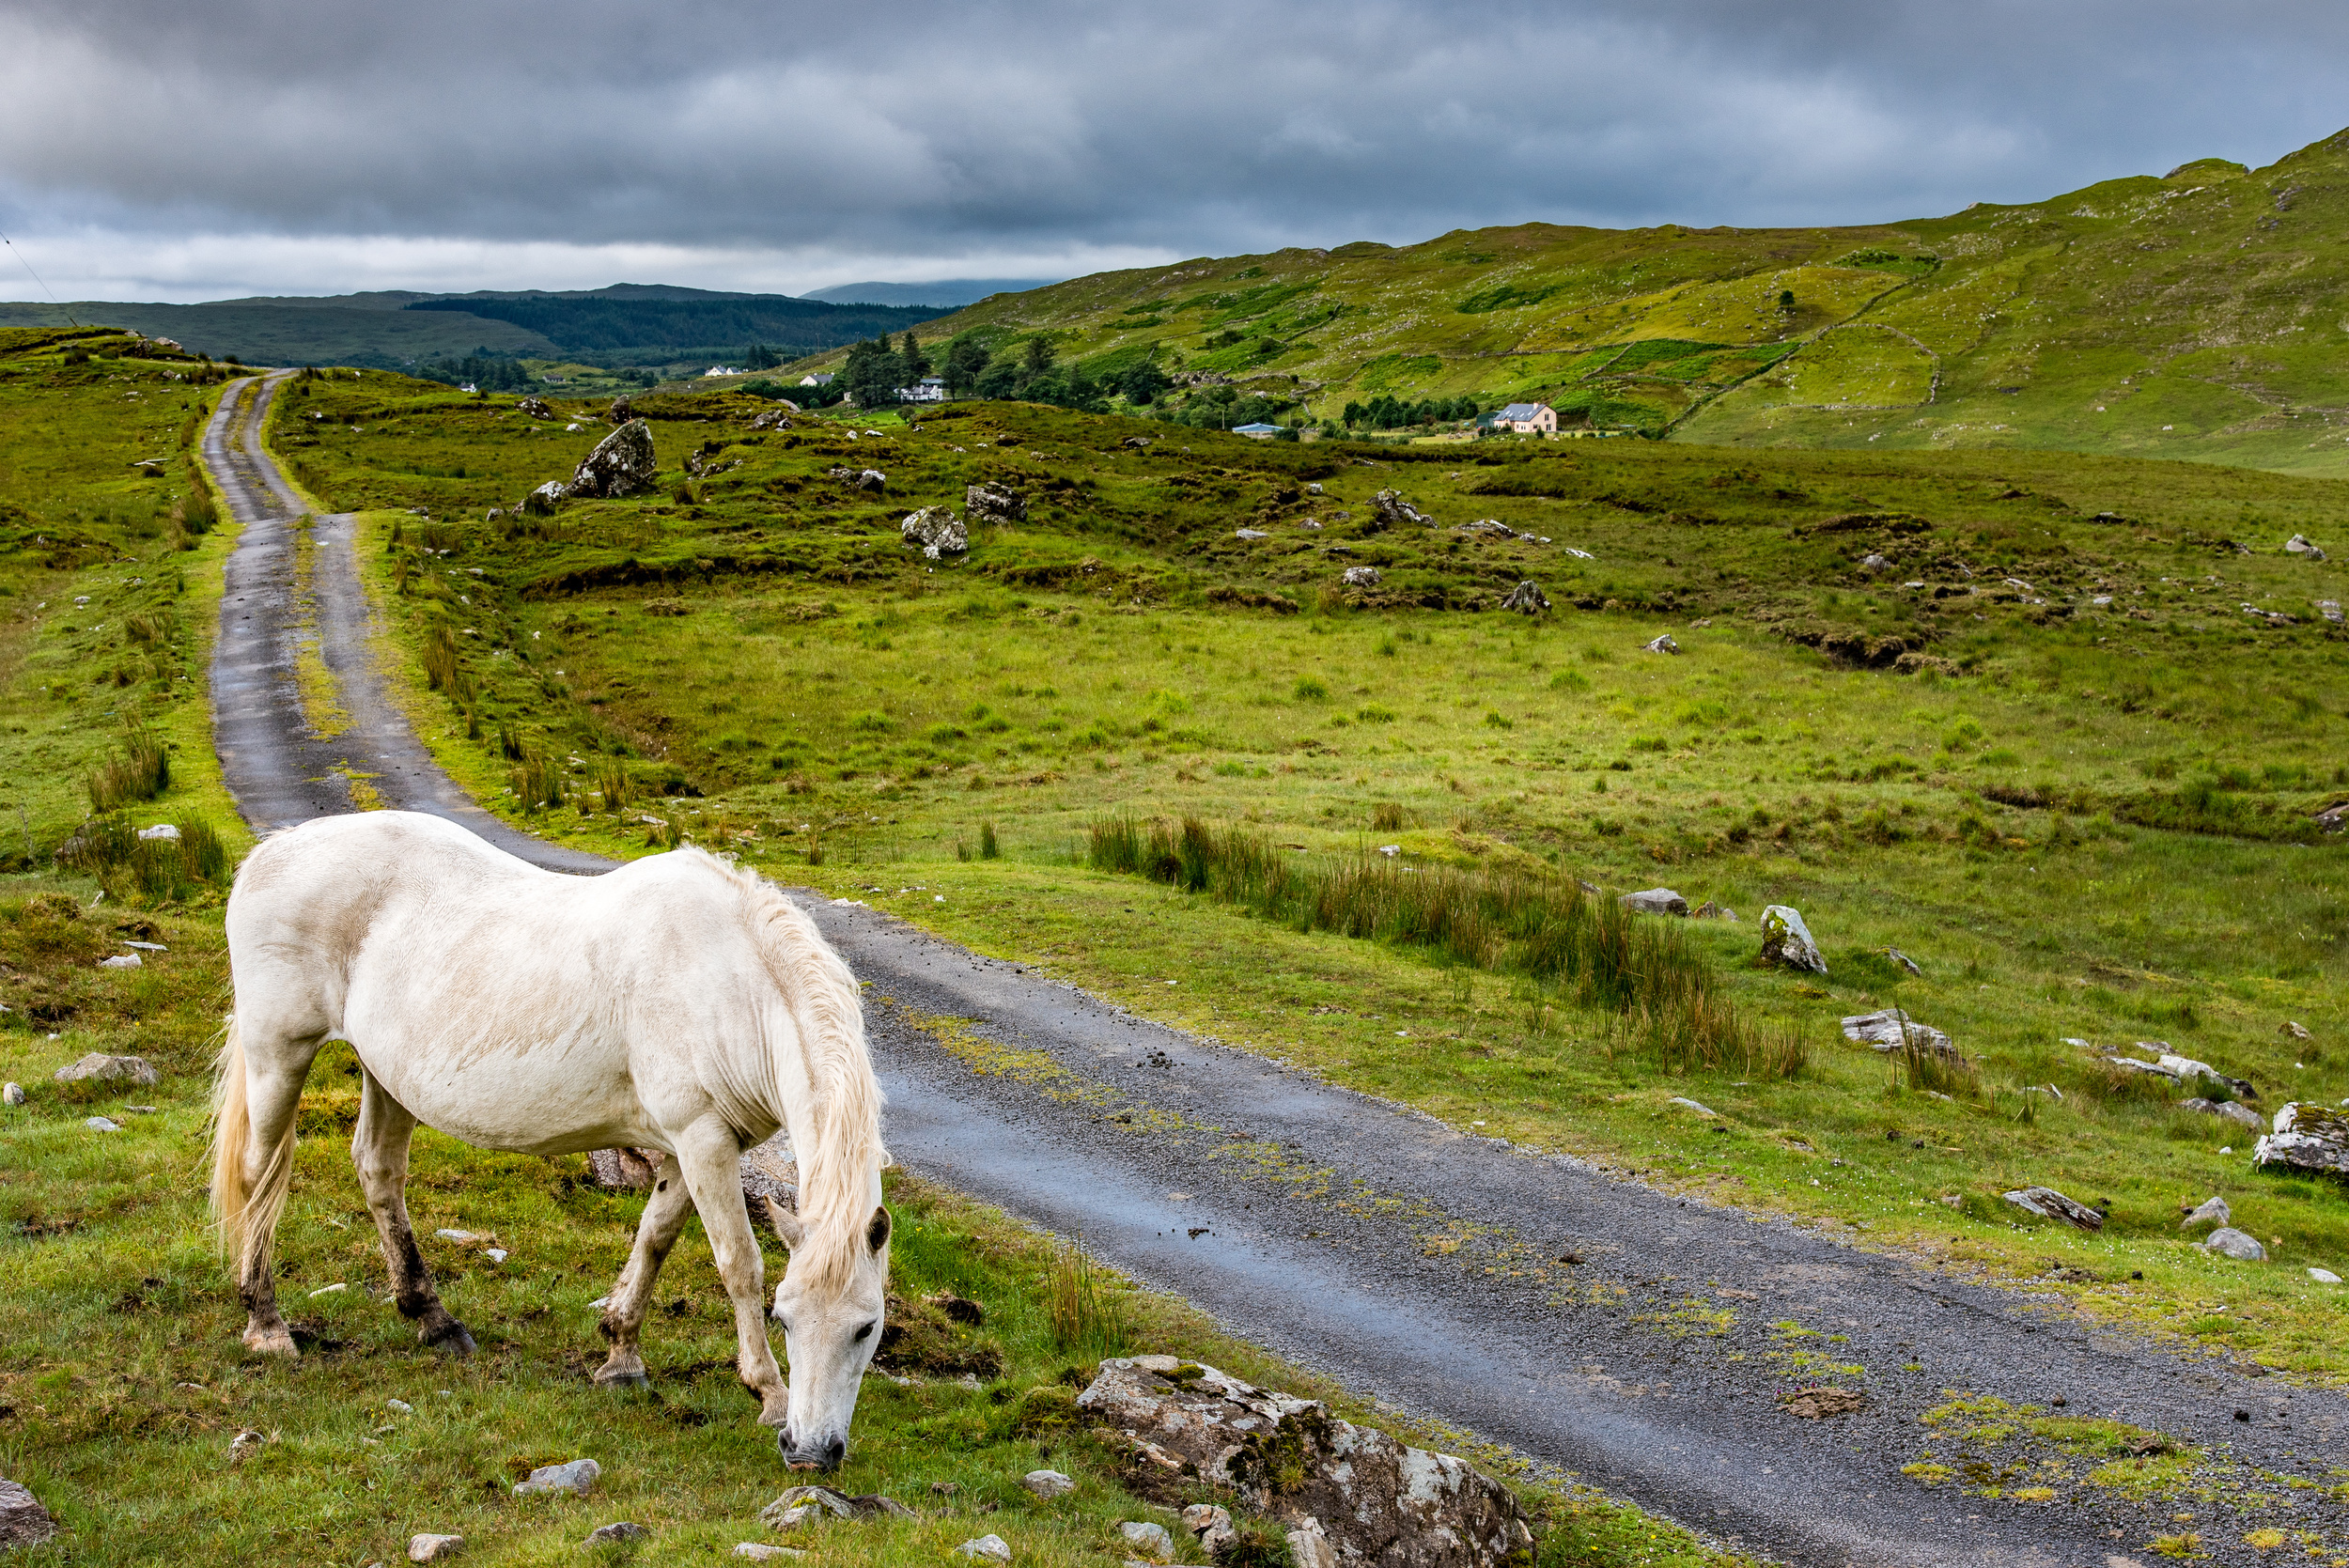 <p>The Emerald Isle is most famous for the native Connemara ponies, with their distinctive long manes and versatility. The breed originates from the country's west coast but can be found around the island, especially if you join one of Ireland’s national pastimes, fox hunting, on your visit.</p><p>You may also like: <a href='https://www.yardbarker.com/lifestyle/articles/out_cold_20_foods_you_shouldnt_refrigerate/s1__34562840'>Out cold: 20 foods you shouldn't refrigerate</a></p>